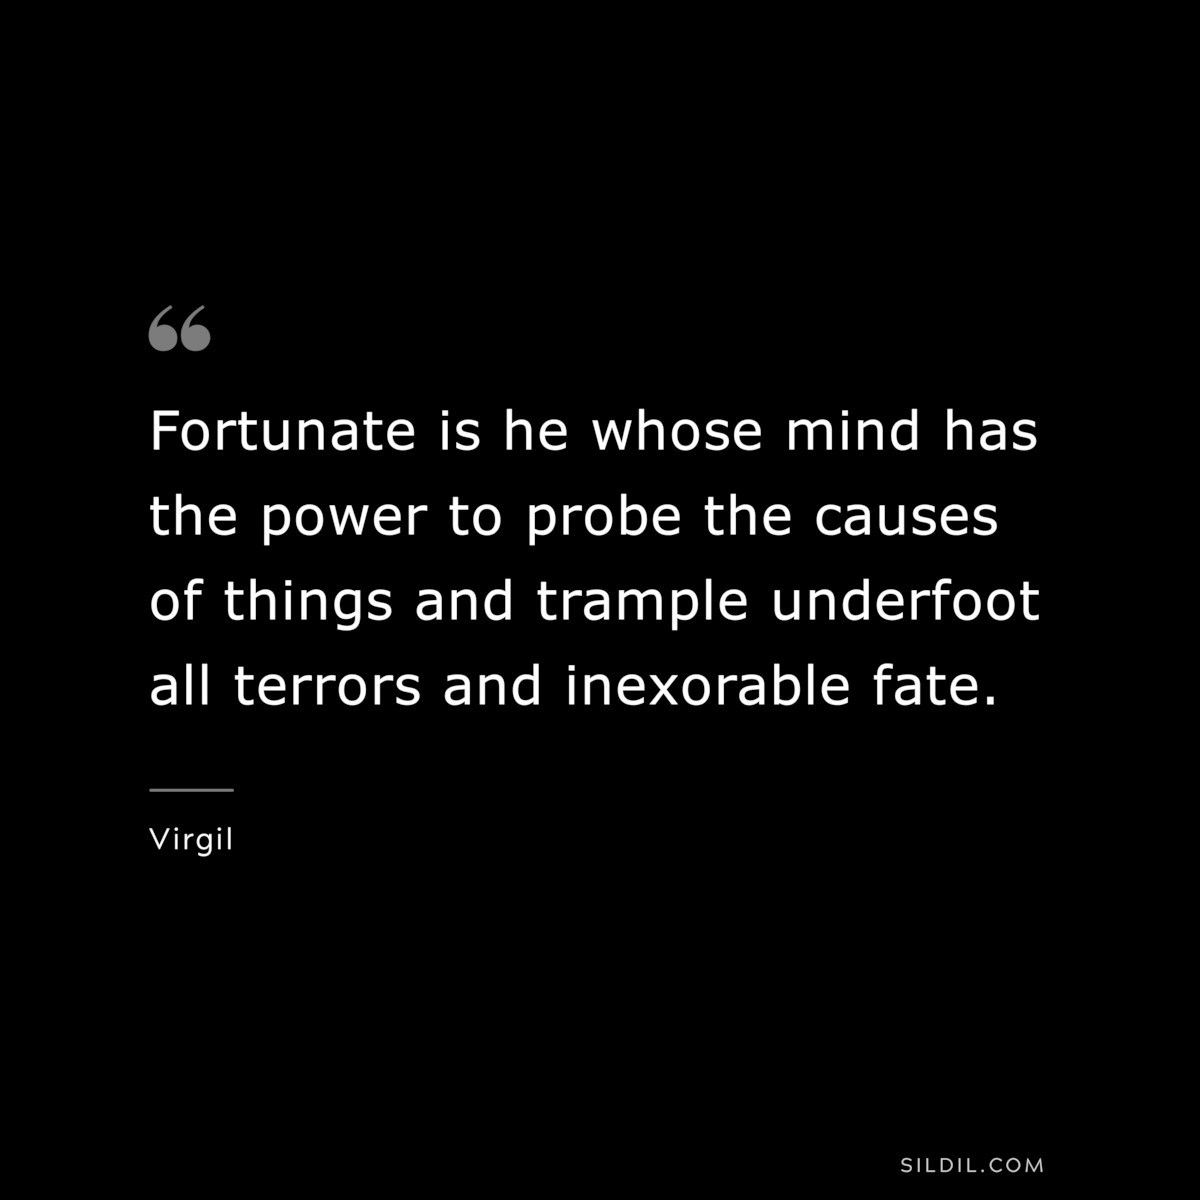 Fortunate is he whose mind has the power to probe the causes of things and trample underfoot all terrors and inexorable fate. ― Virgil